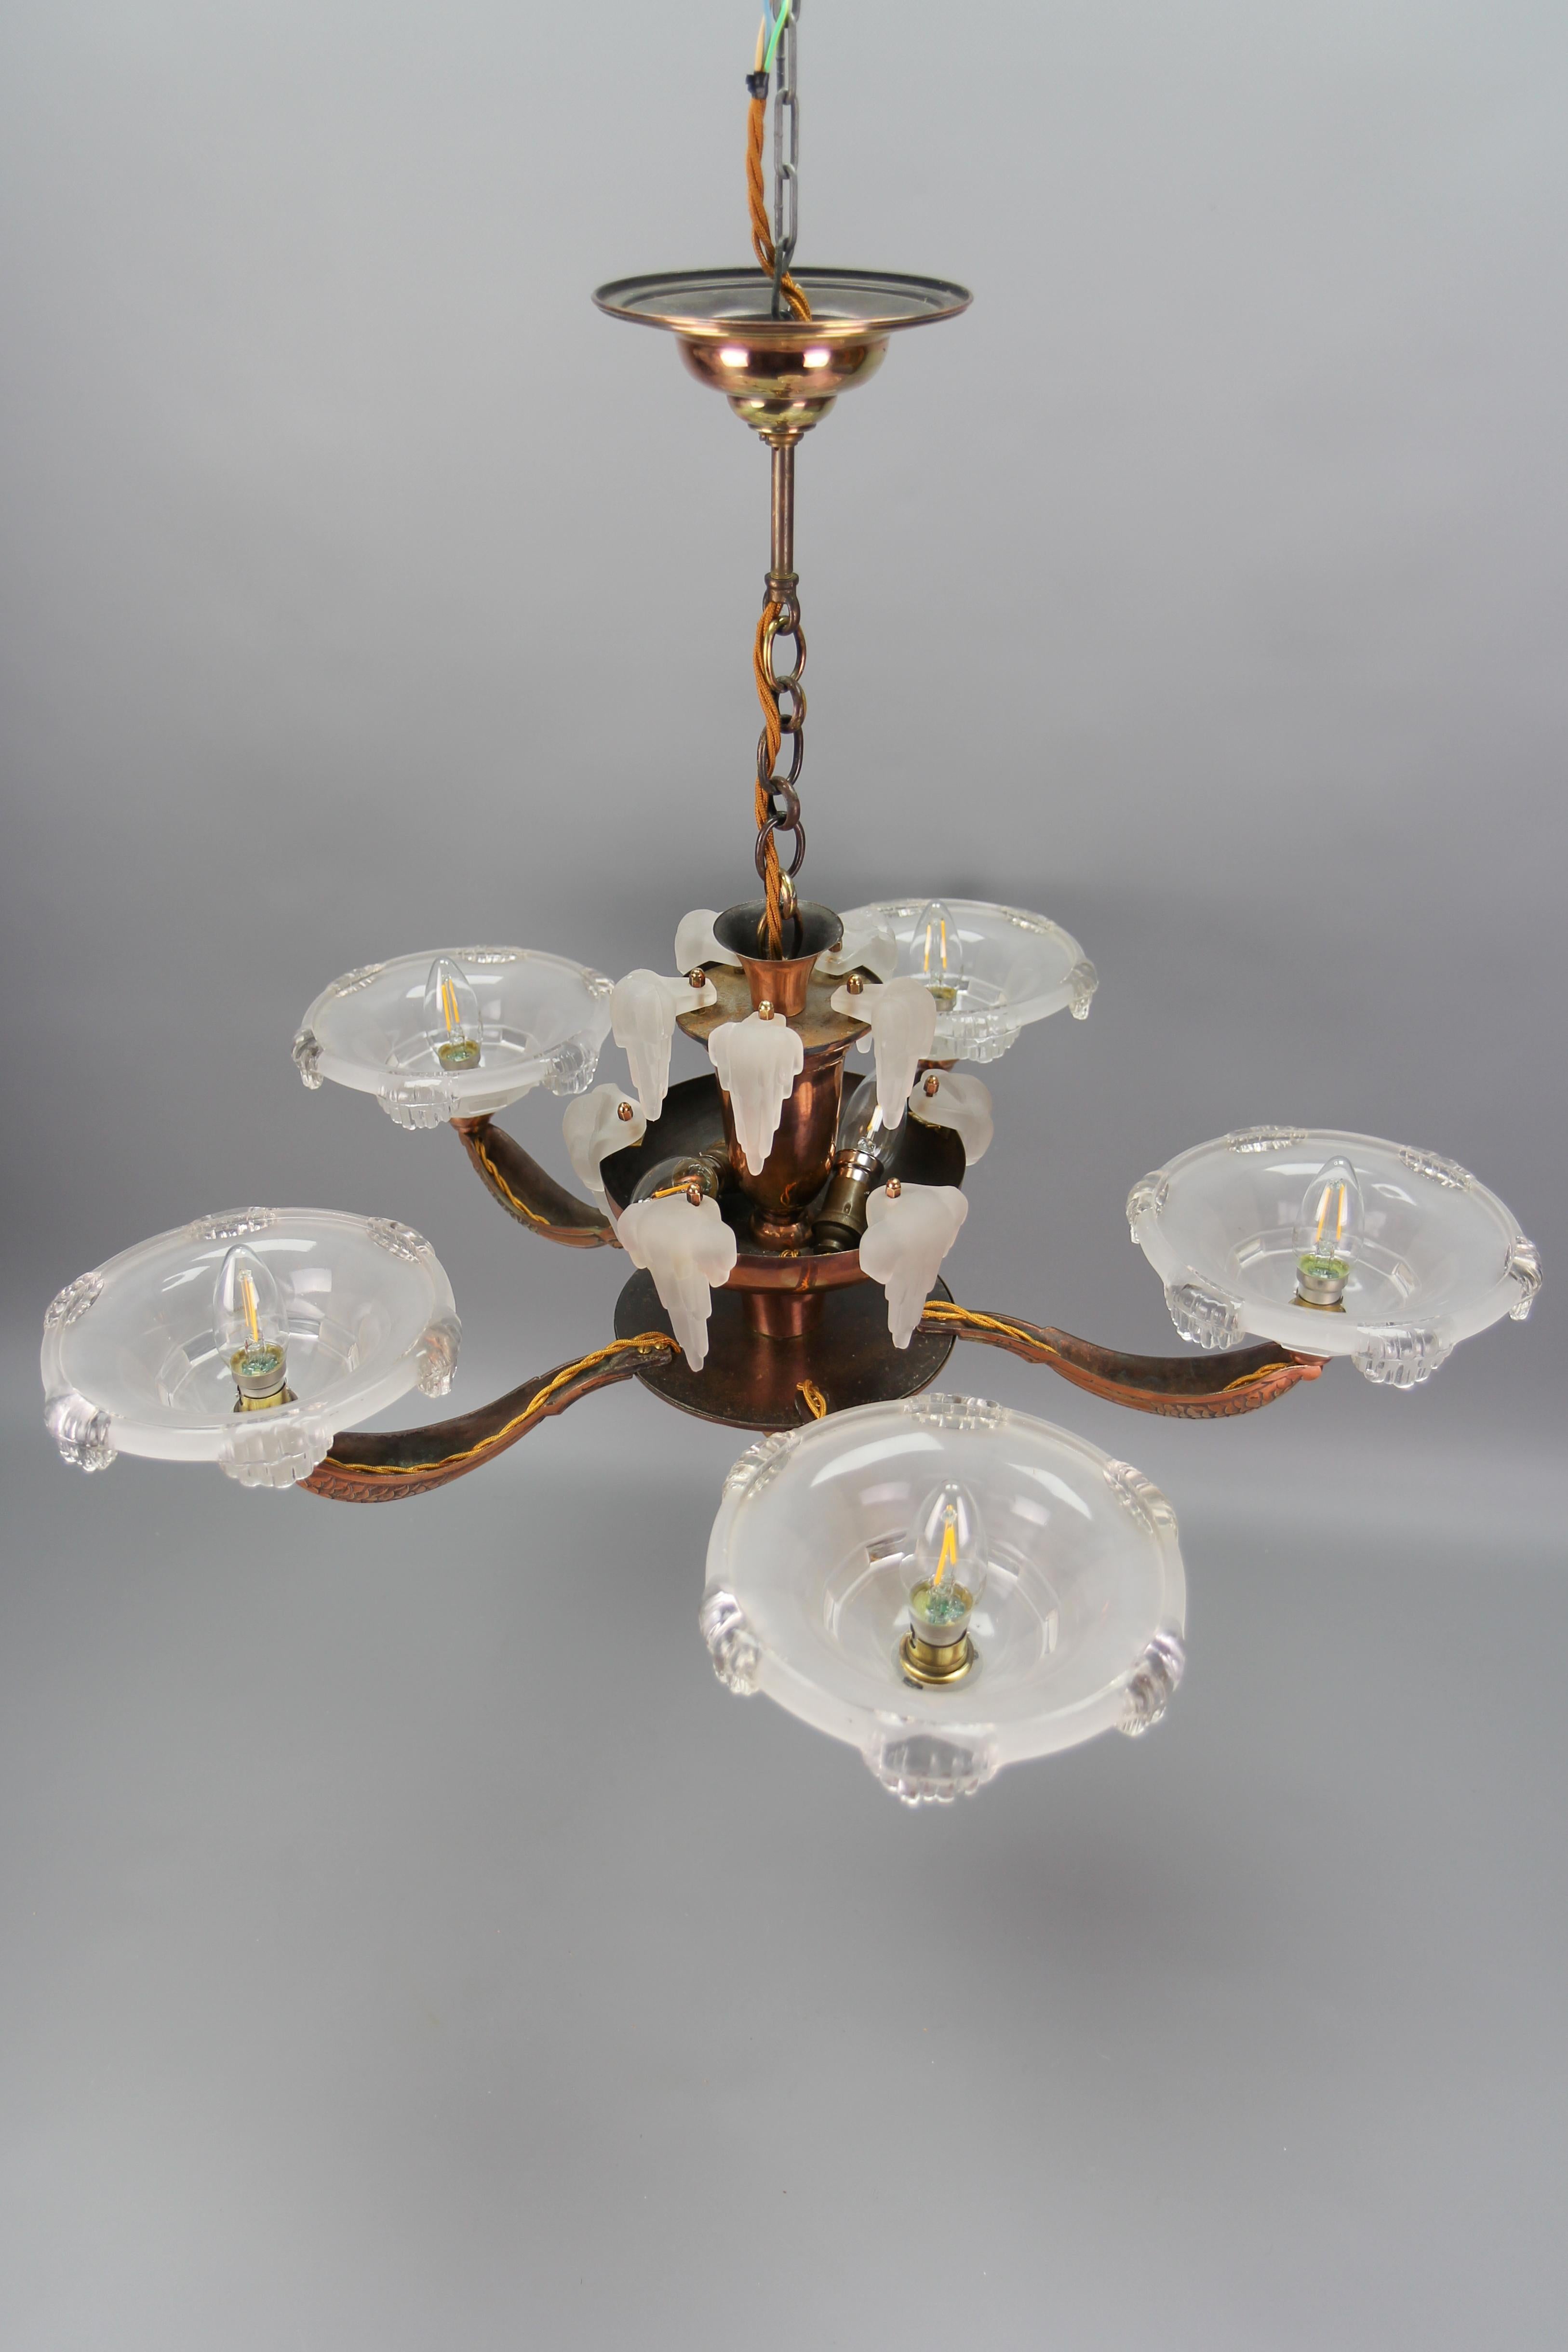 French Art Deco 7-Light Frosted Glass, Brass and Copper Chandelier, 1930s For Sale 7